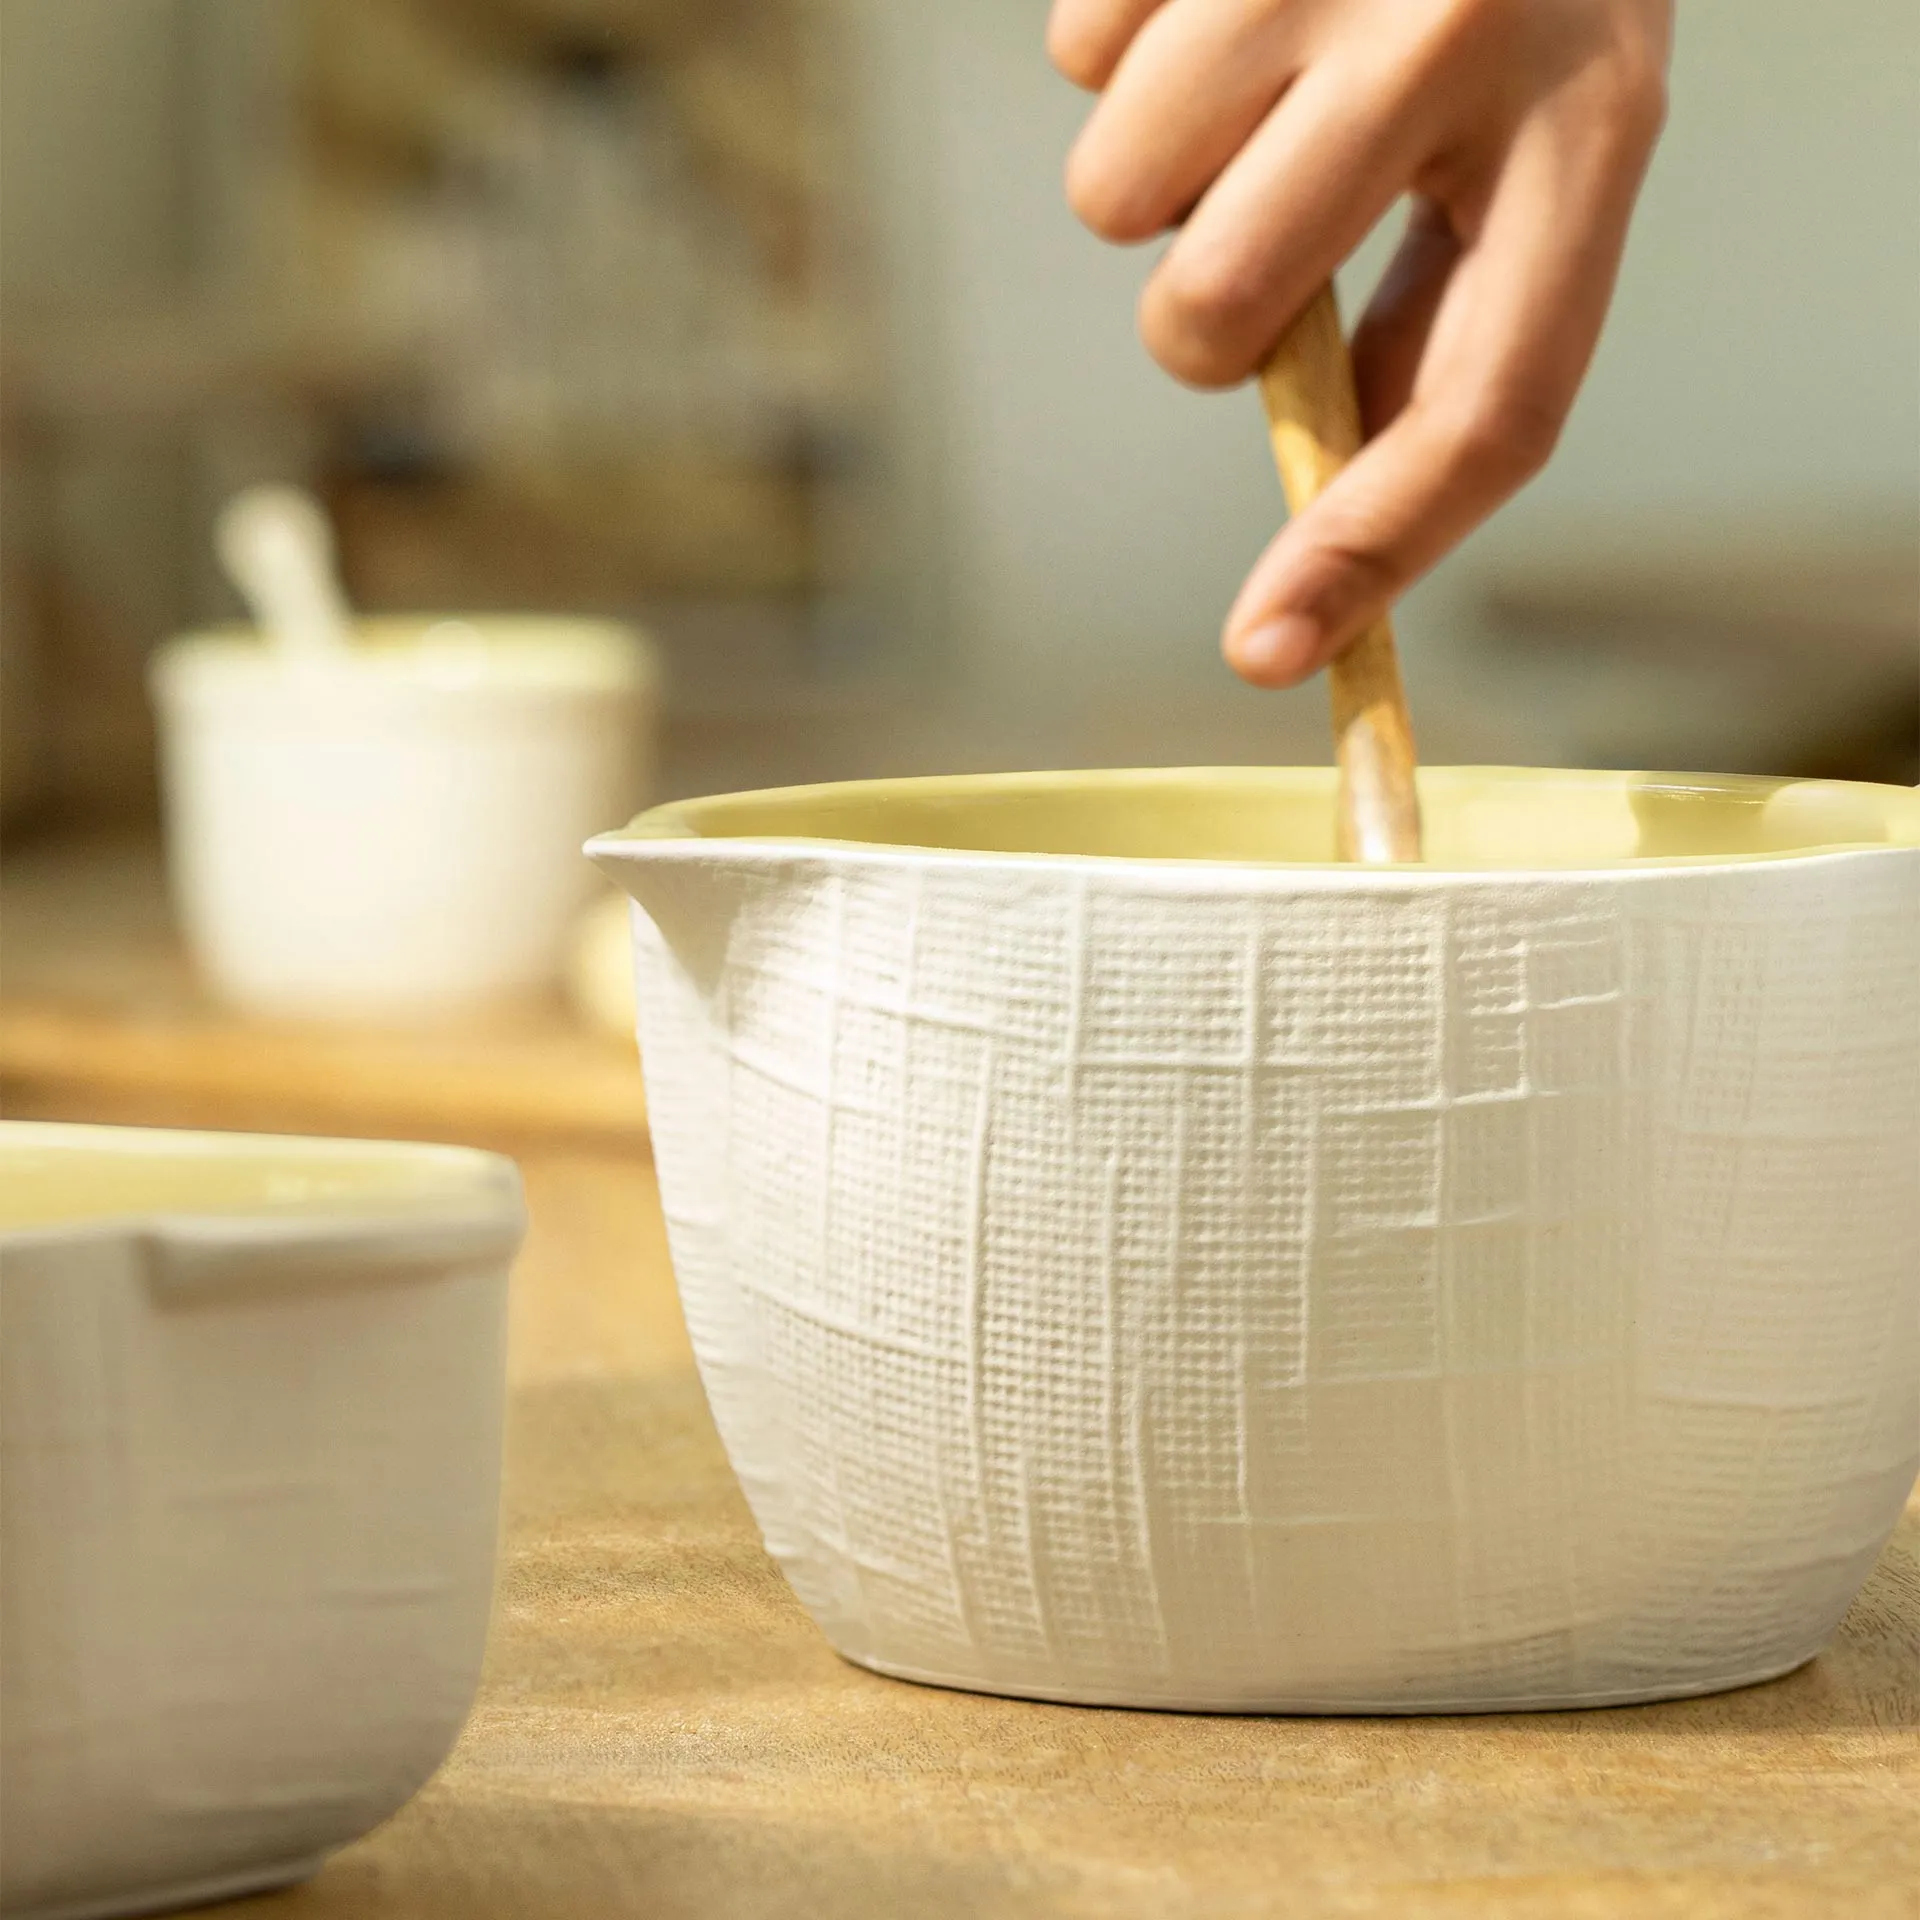 Buy Butter-up Ceramic Mixing Bowl - Large Online - Ellementry